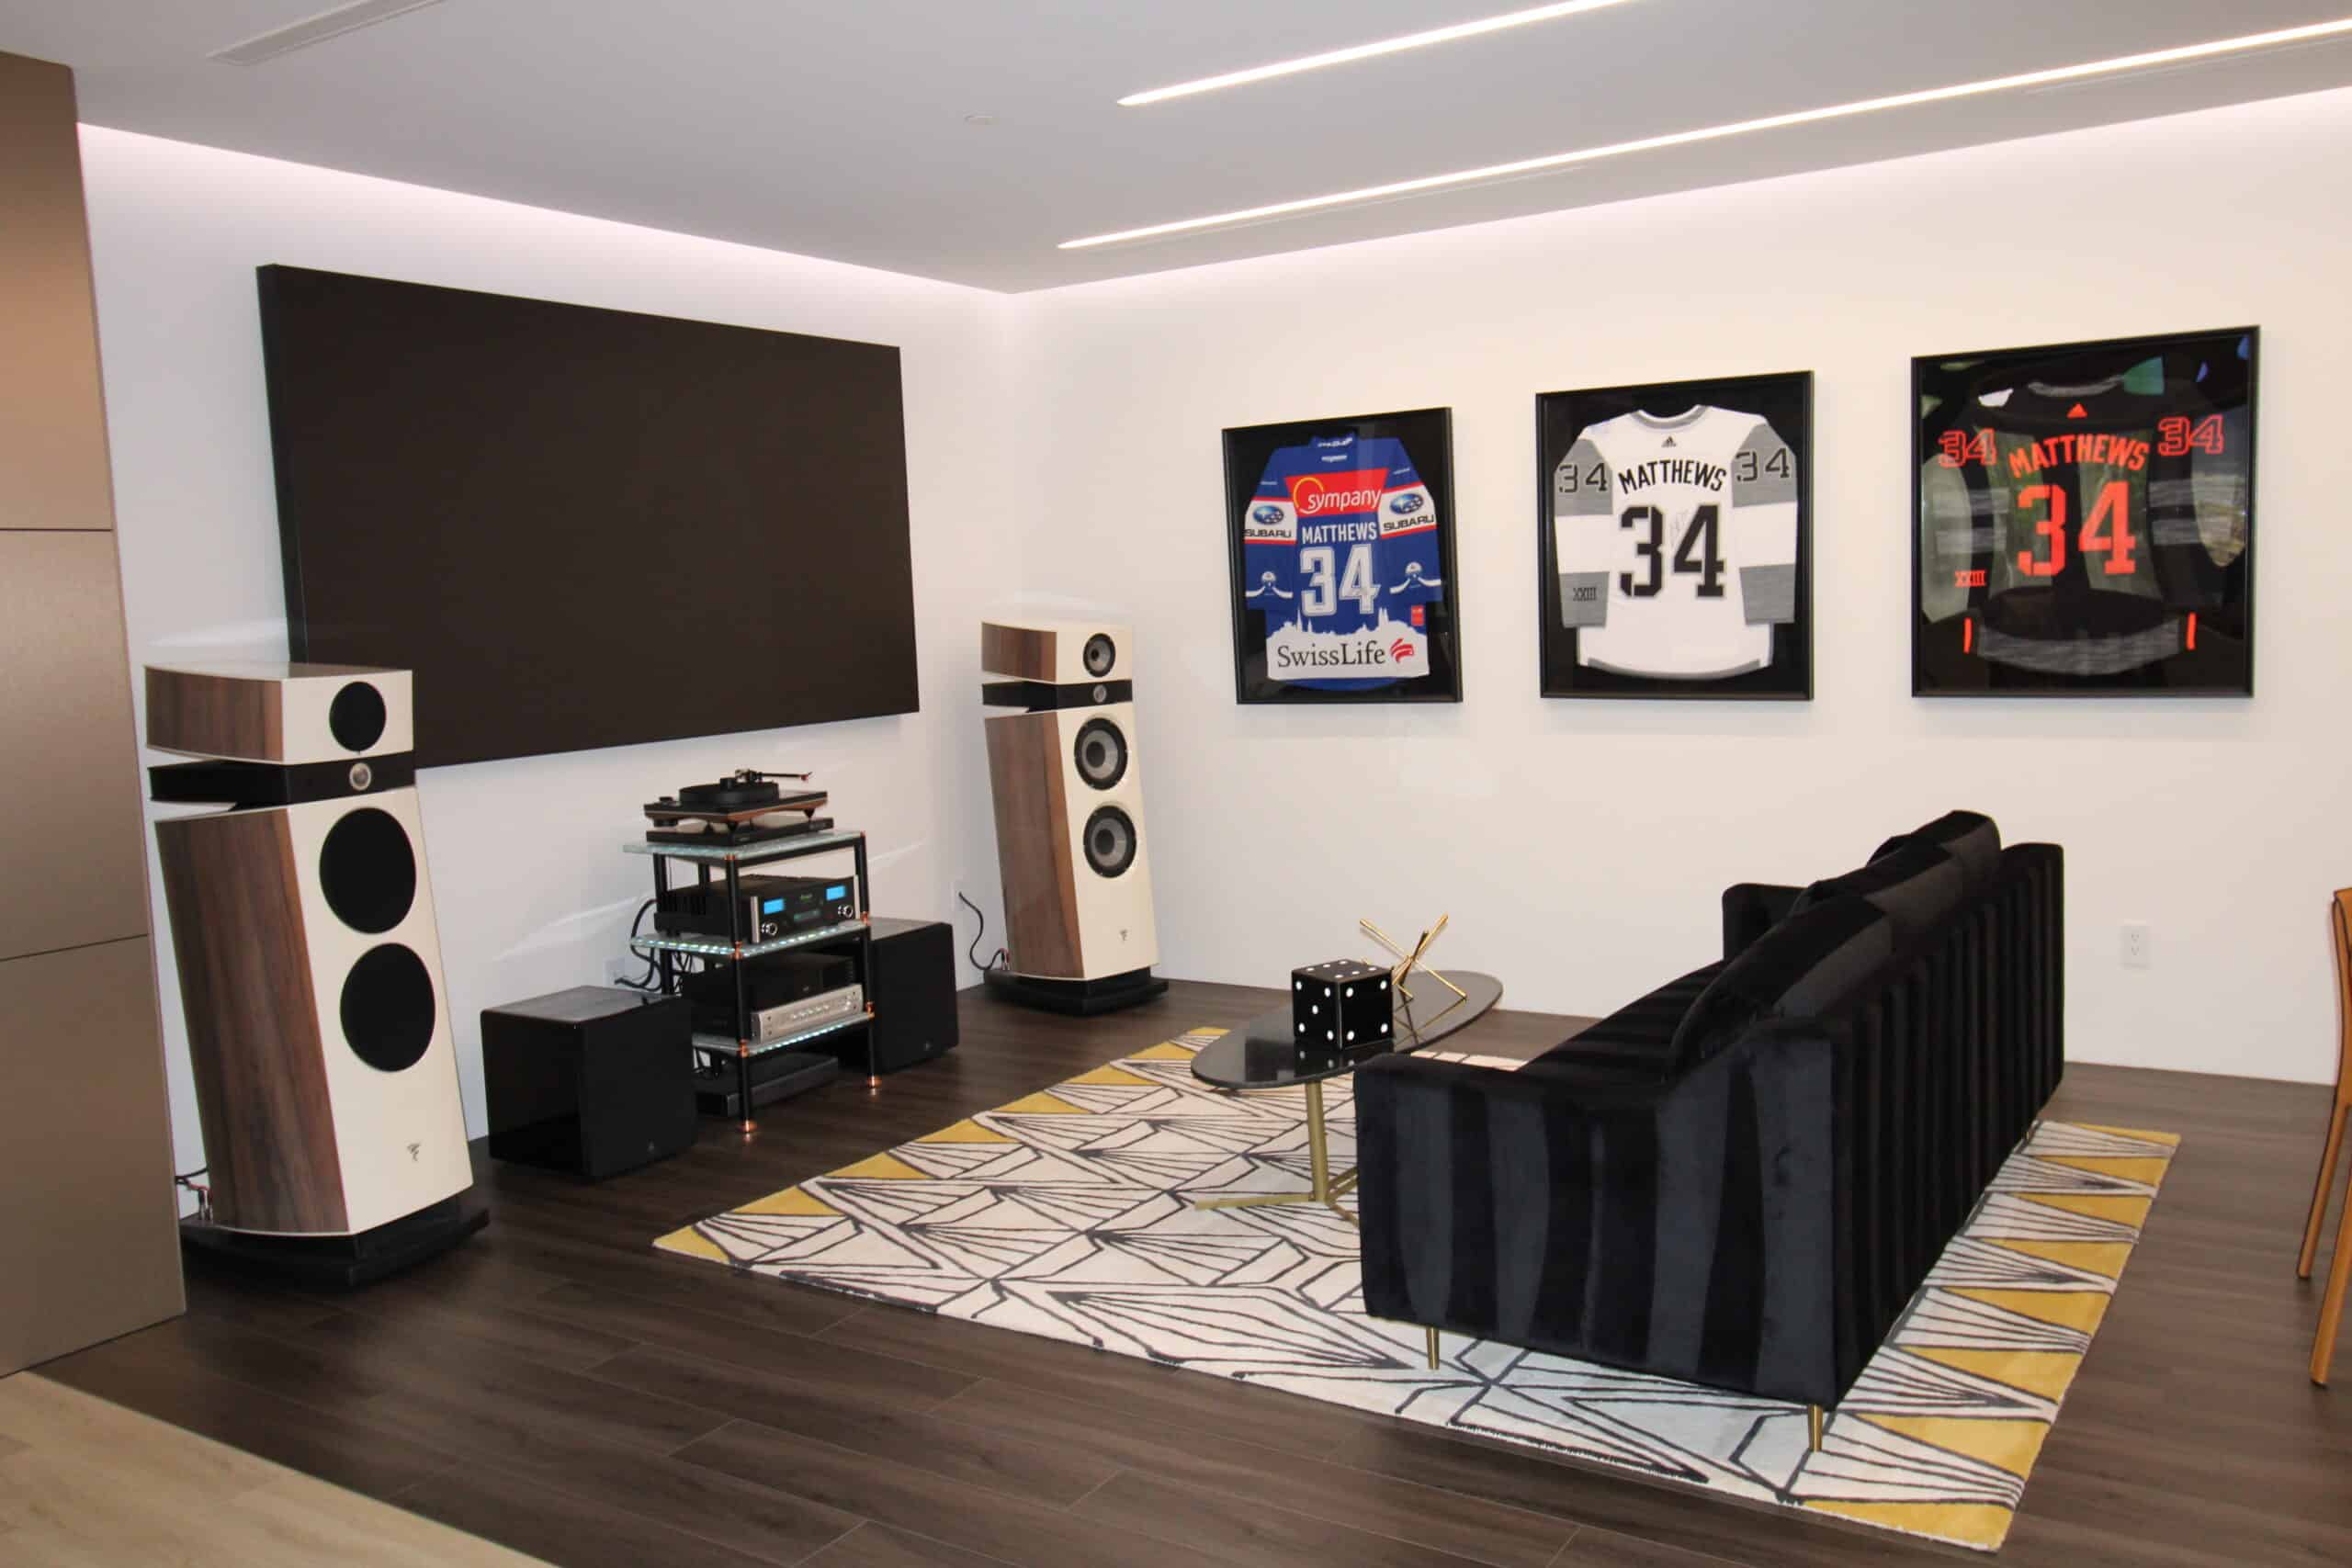 Showroom Images | Acoustic Designs Group